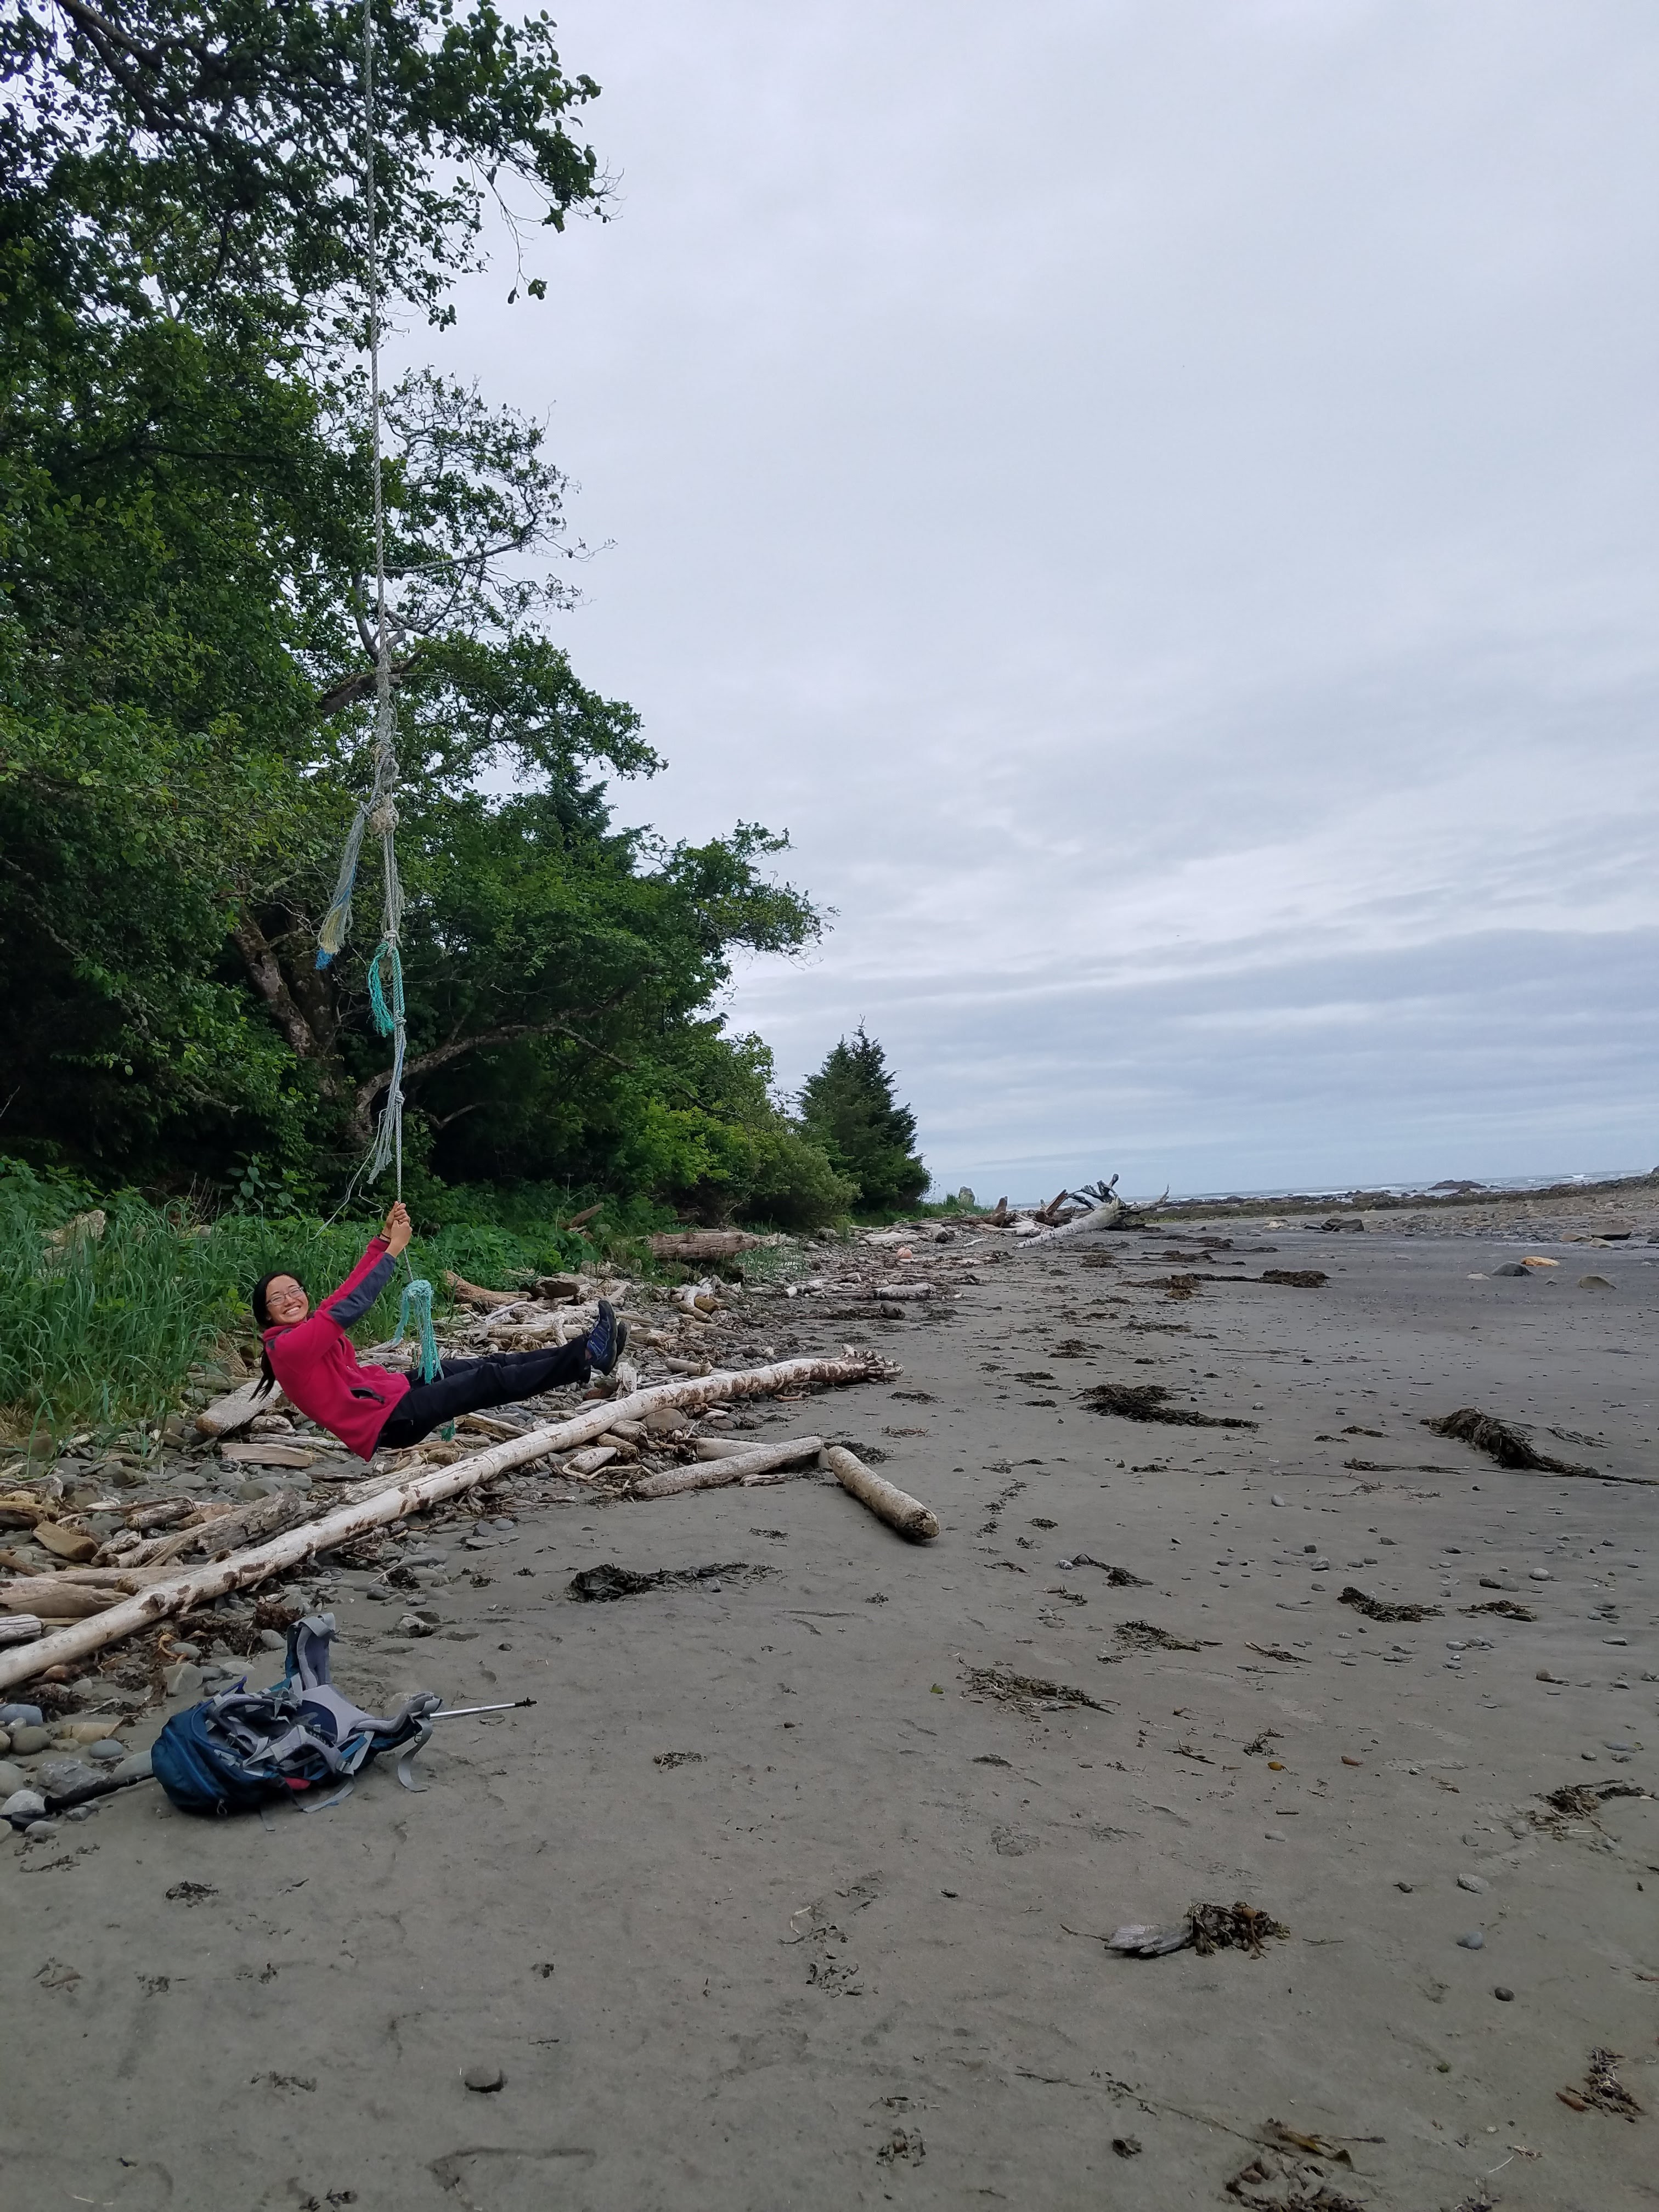 There's a fair bit of sea detritus along the hike. Lots of washed up ship parts, buoys, and ropes. We found someone made a ropeswing here.